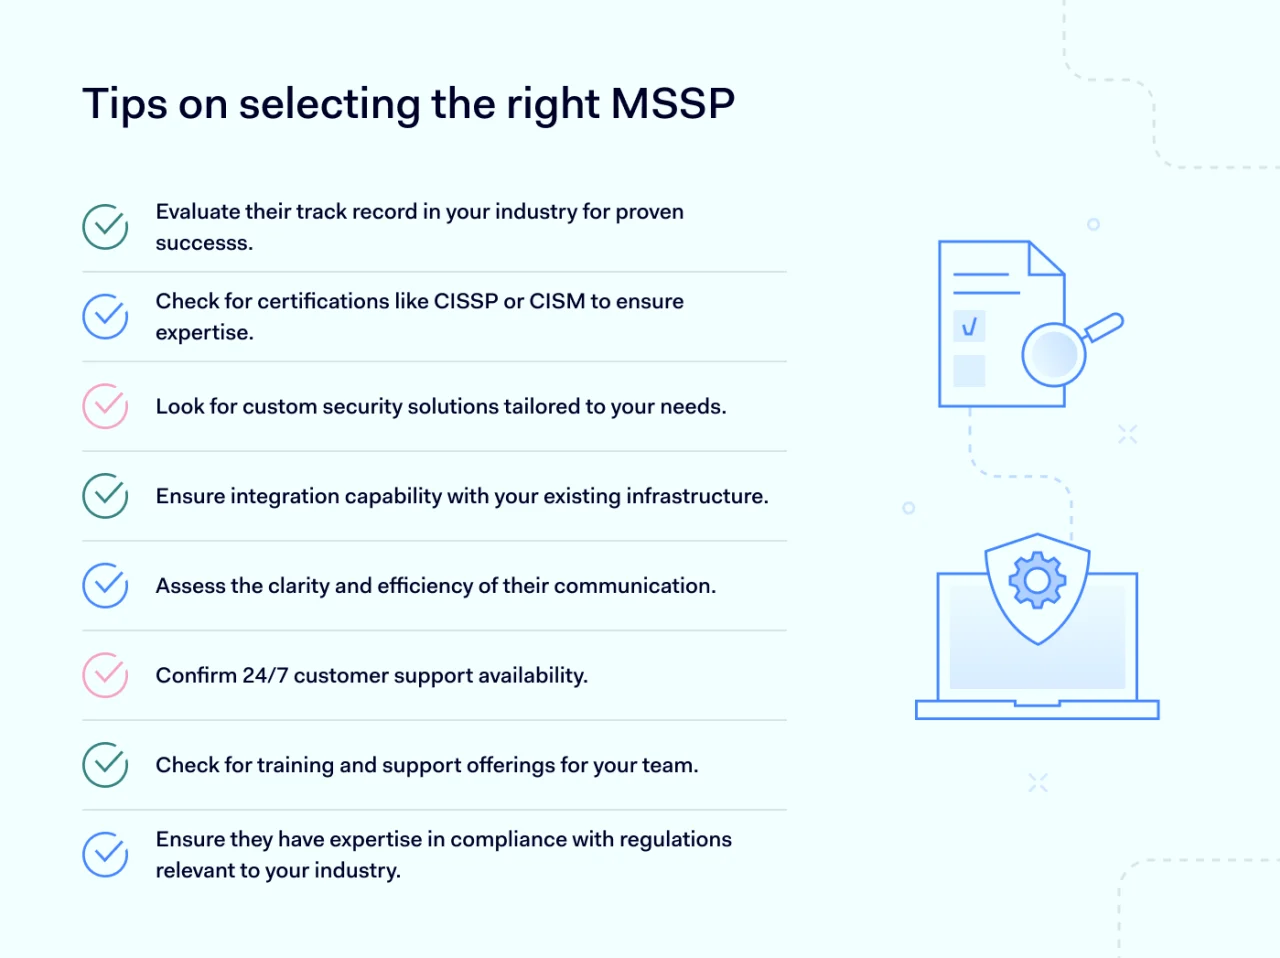 Tips on selecting the right Managed Security Service Provider